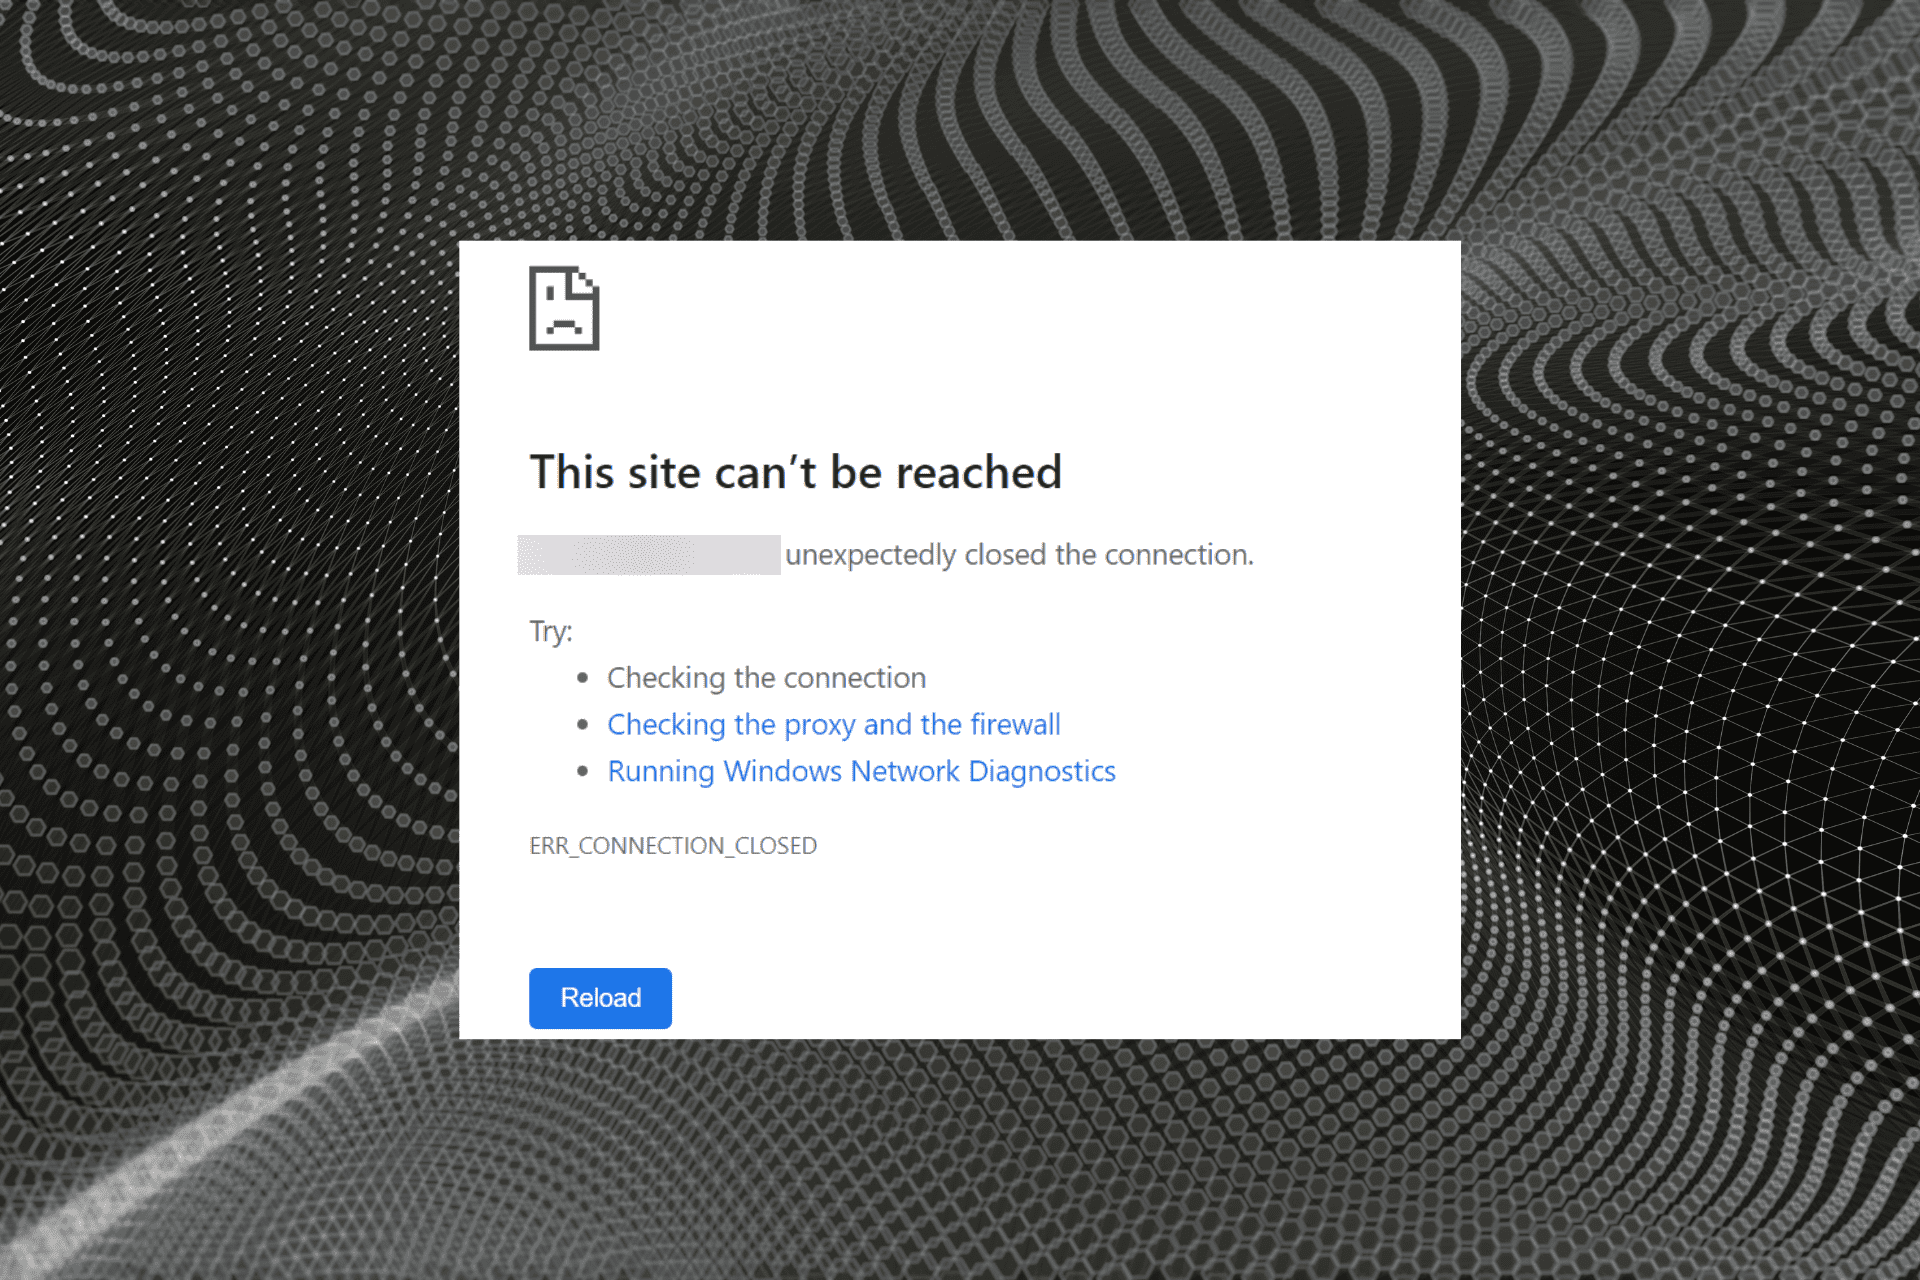 fix this site can’t be reached error